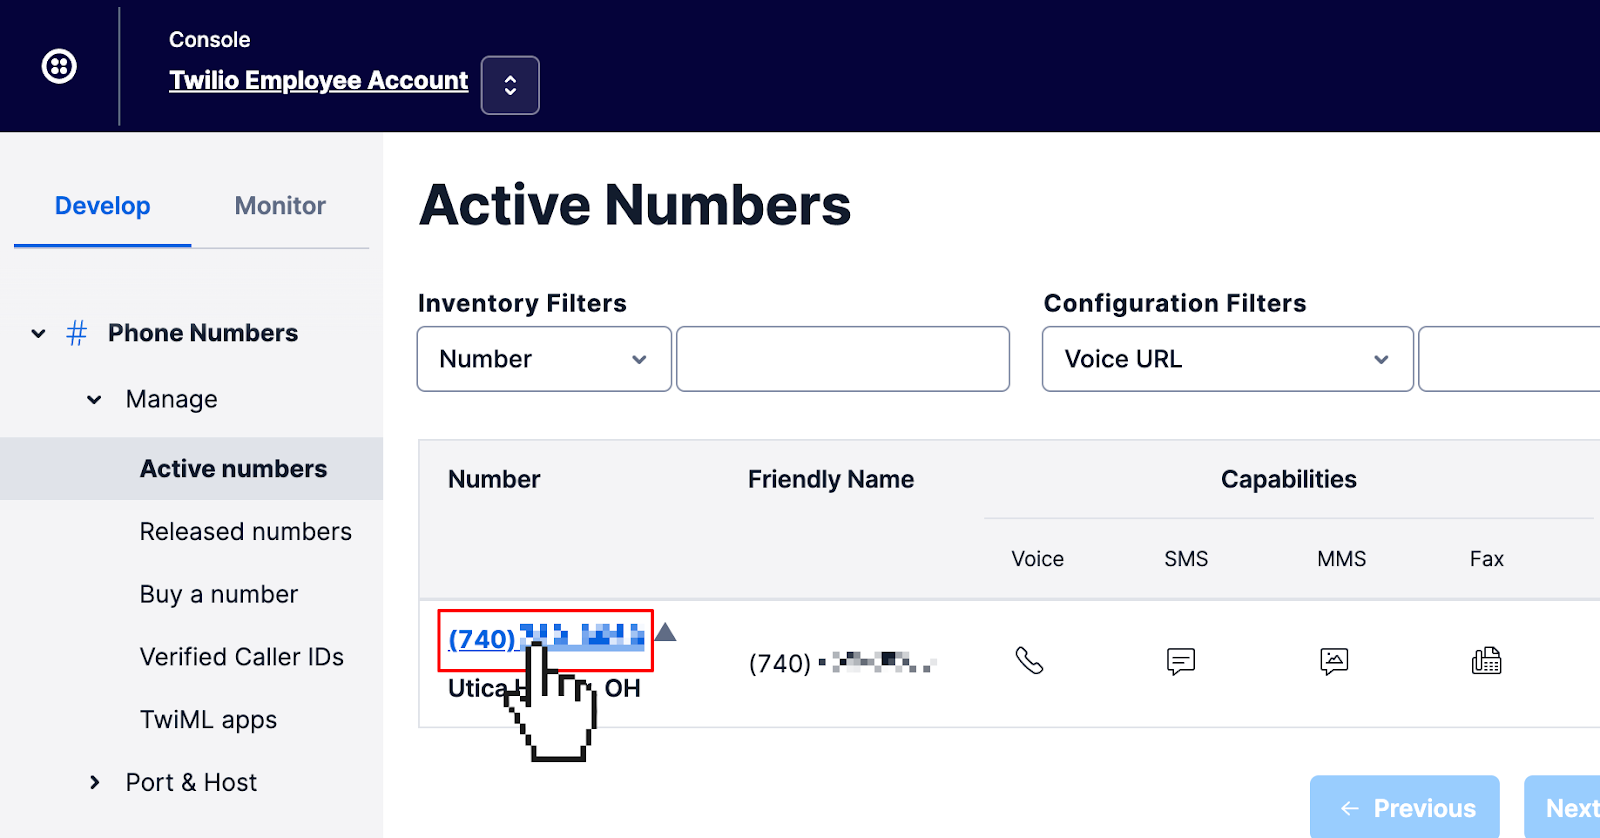 Twilio Console page listing active phone numbers in your Twilio account. Cursor is clicking on the single phone number in the list.